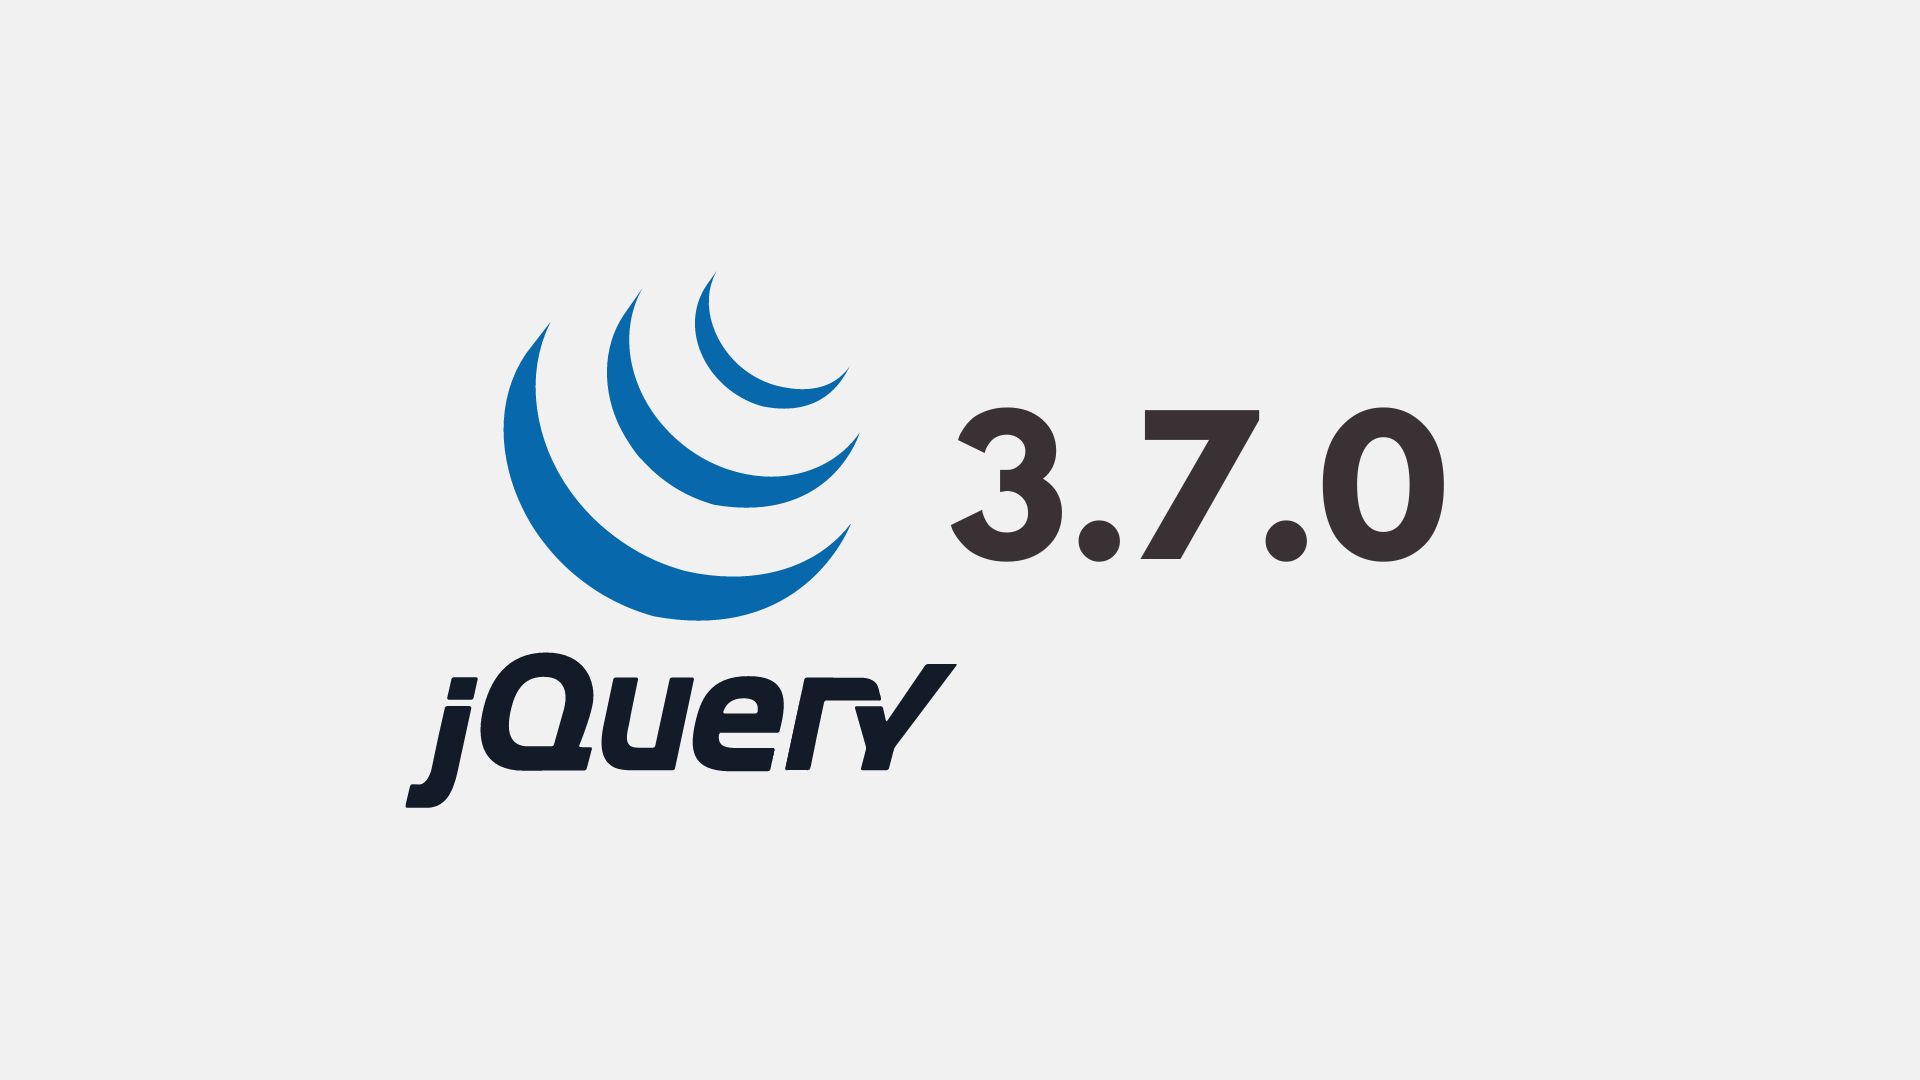 jQuery 3.7.0 features